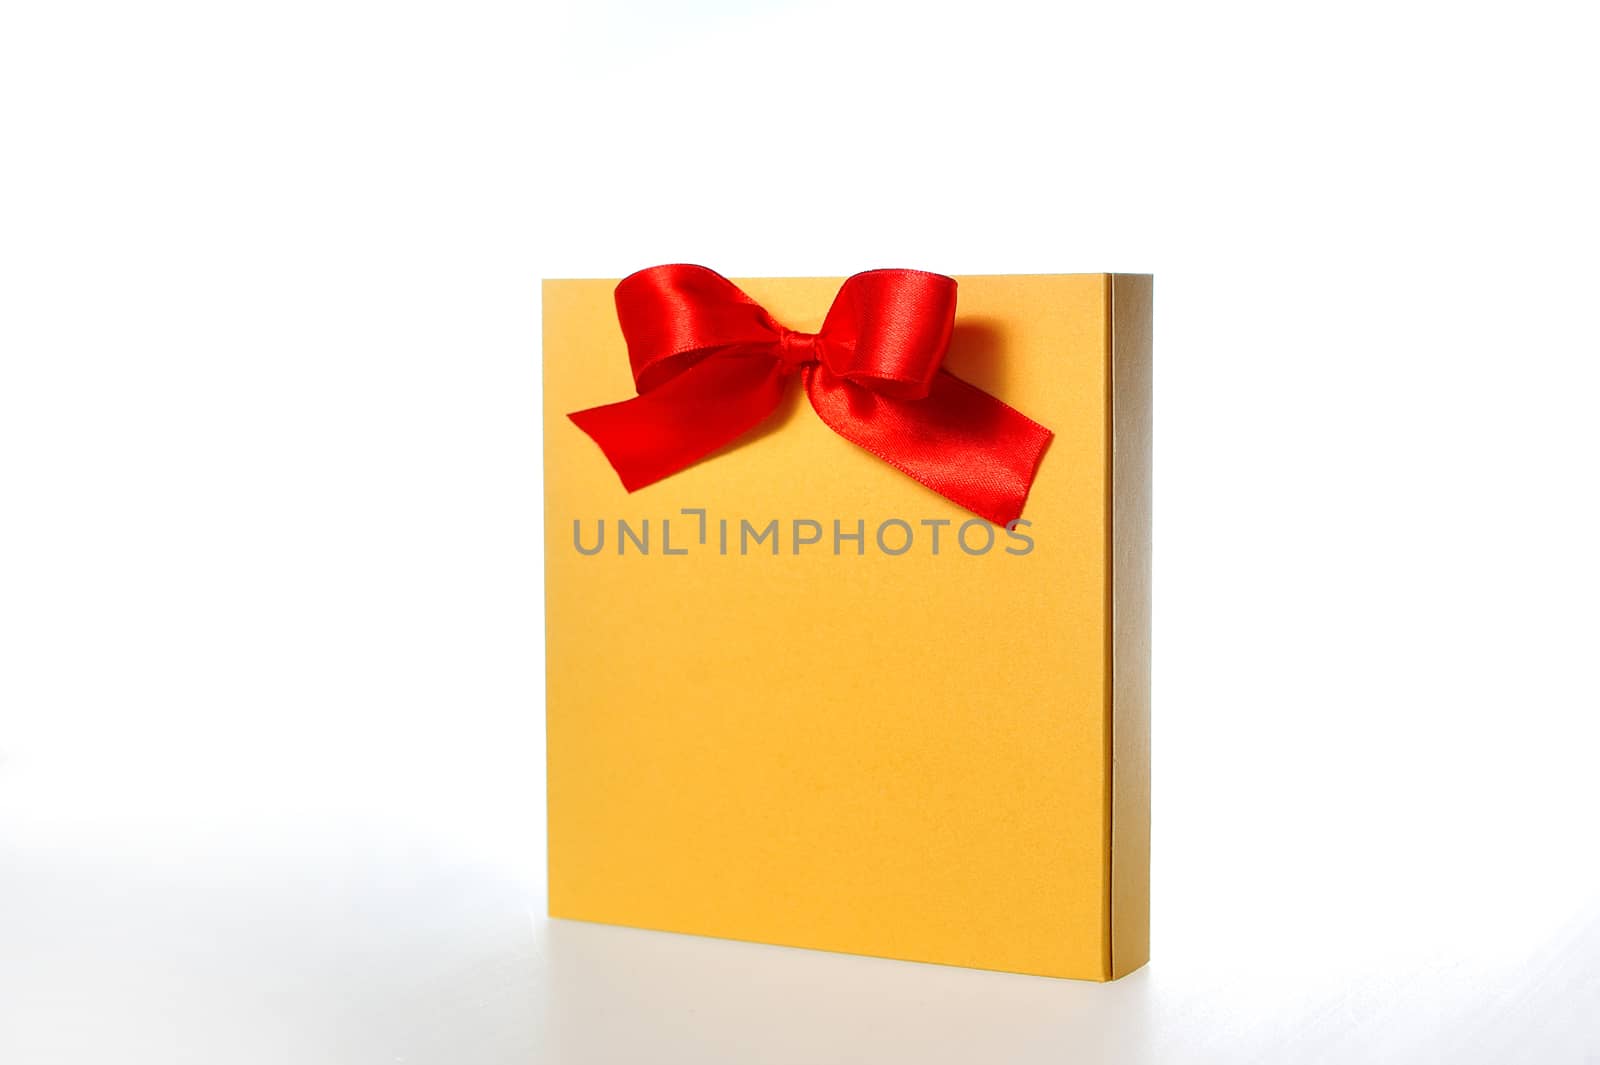 festive gold box with a red bow on a white background.